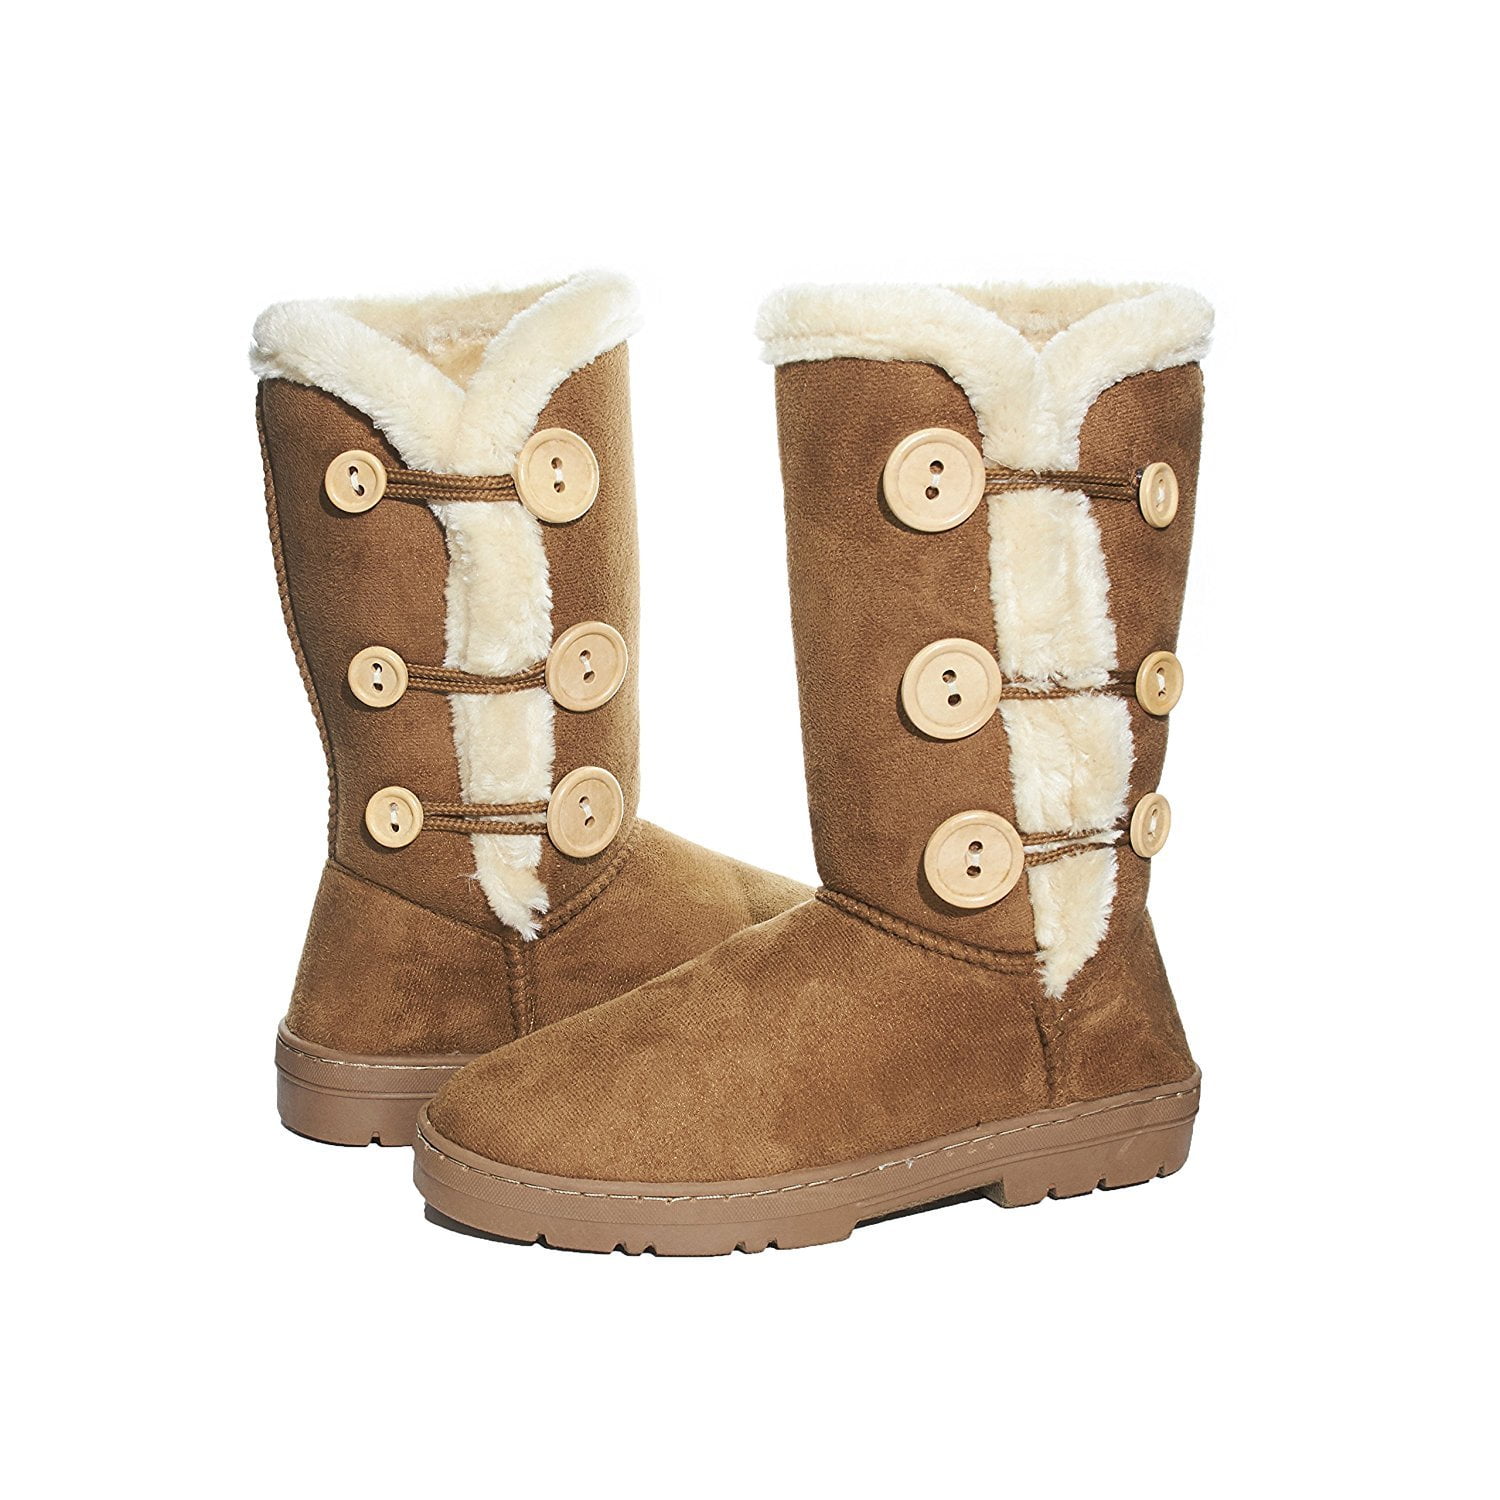 Buy > womens size 5 snow boots > in stock